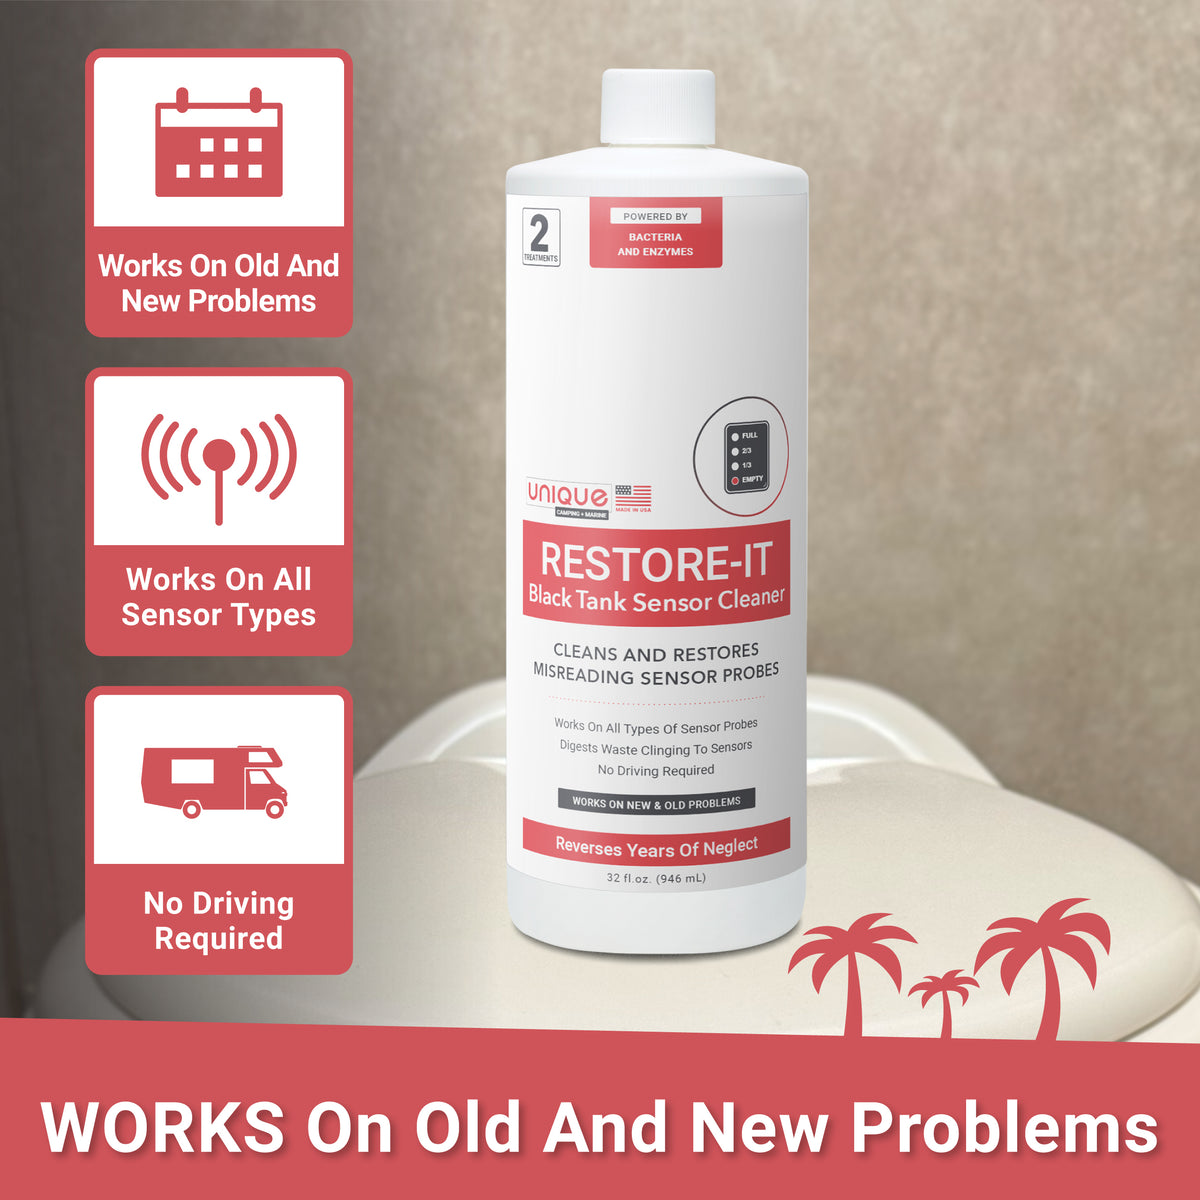 Restore-It Black Tank Sensor Cleaner. Works on old and new problems